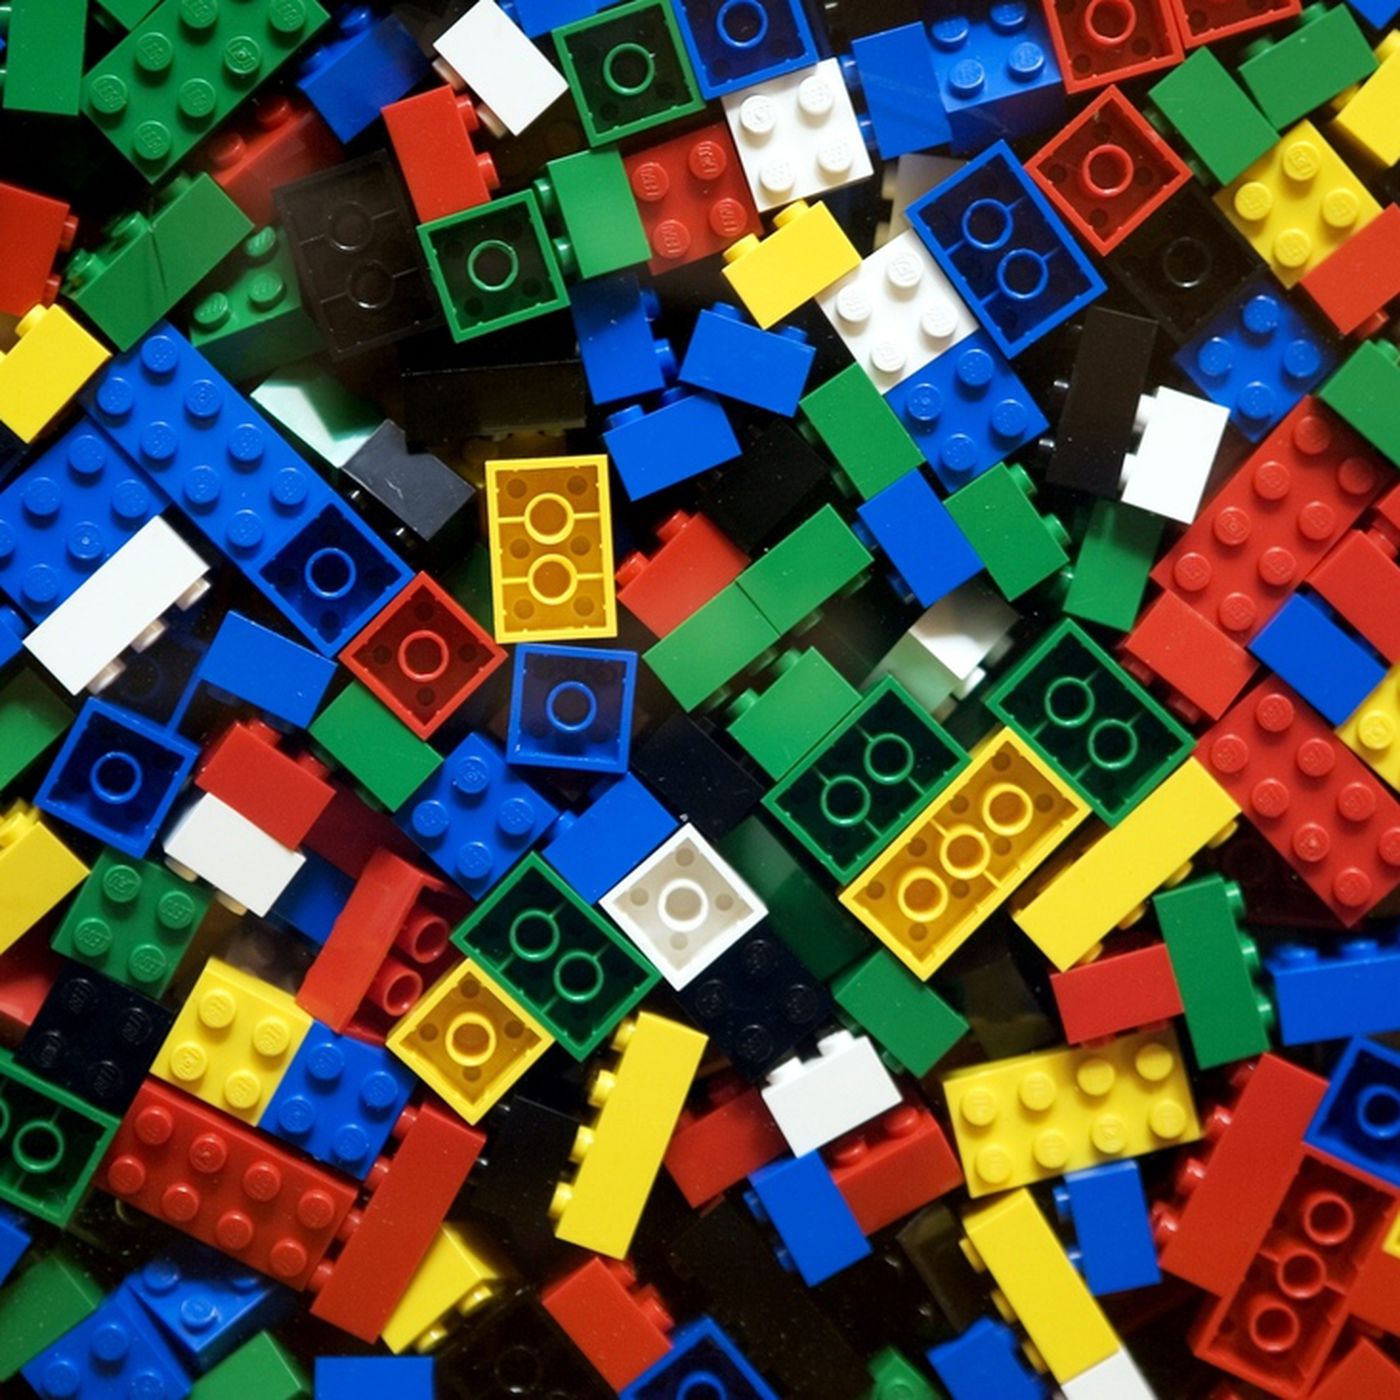 Image of multicolored legos jumbled together.